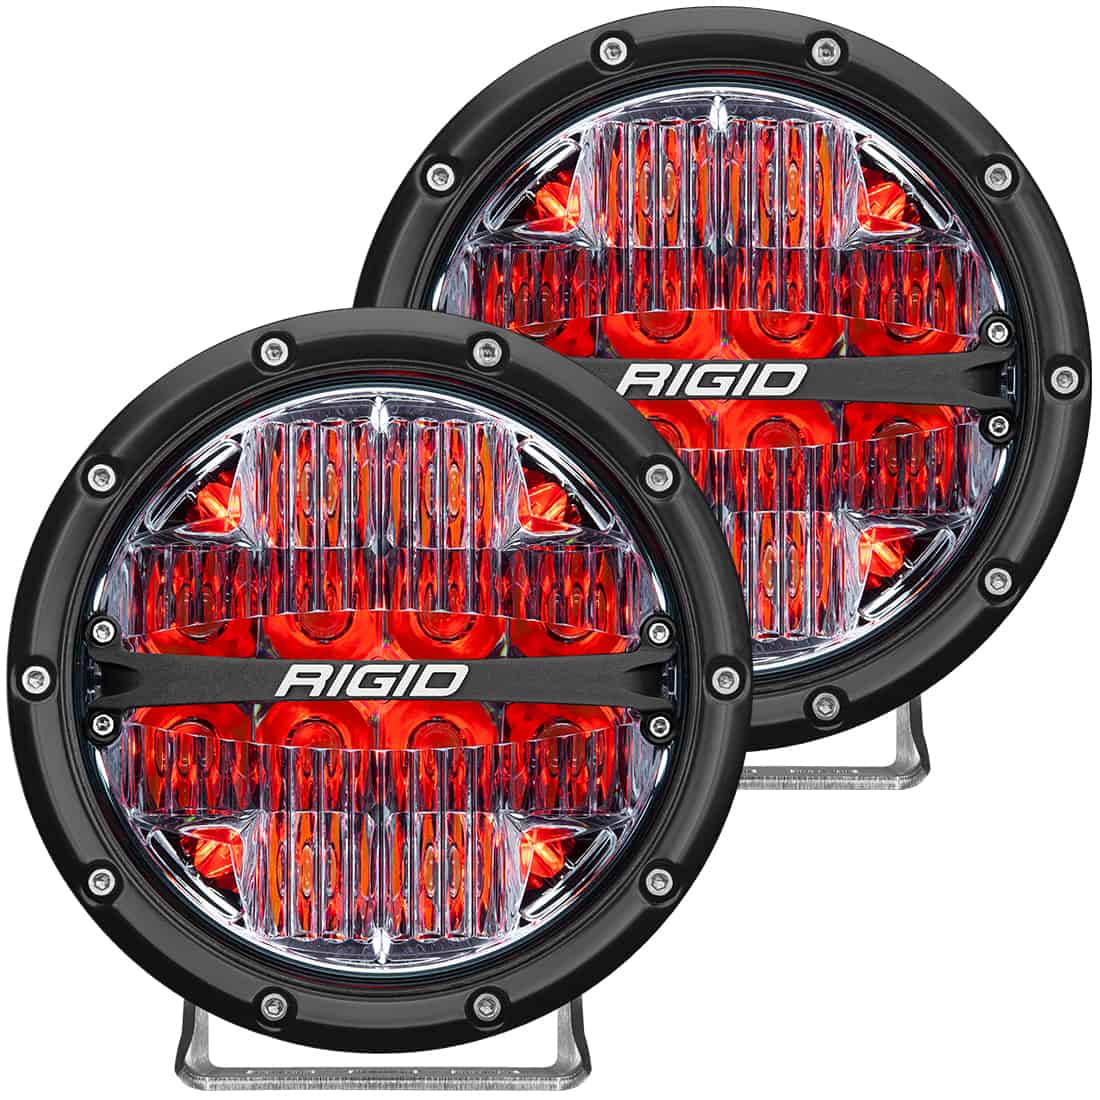 360-Series 6 Inch Led Off-Road Drive Beam Red Backlight Pair RIGID Lighting 36205